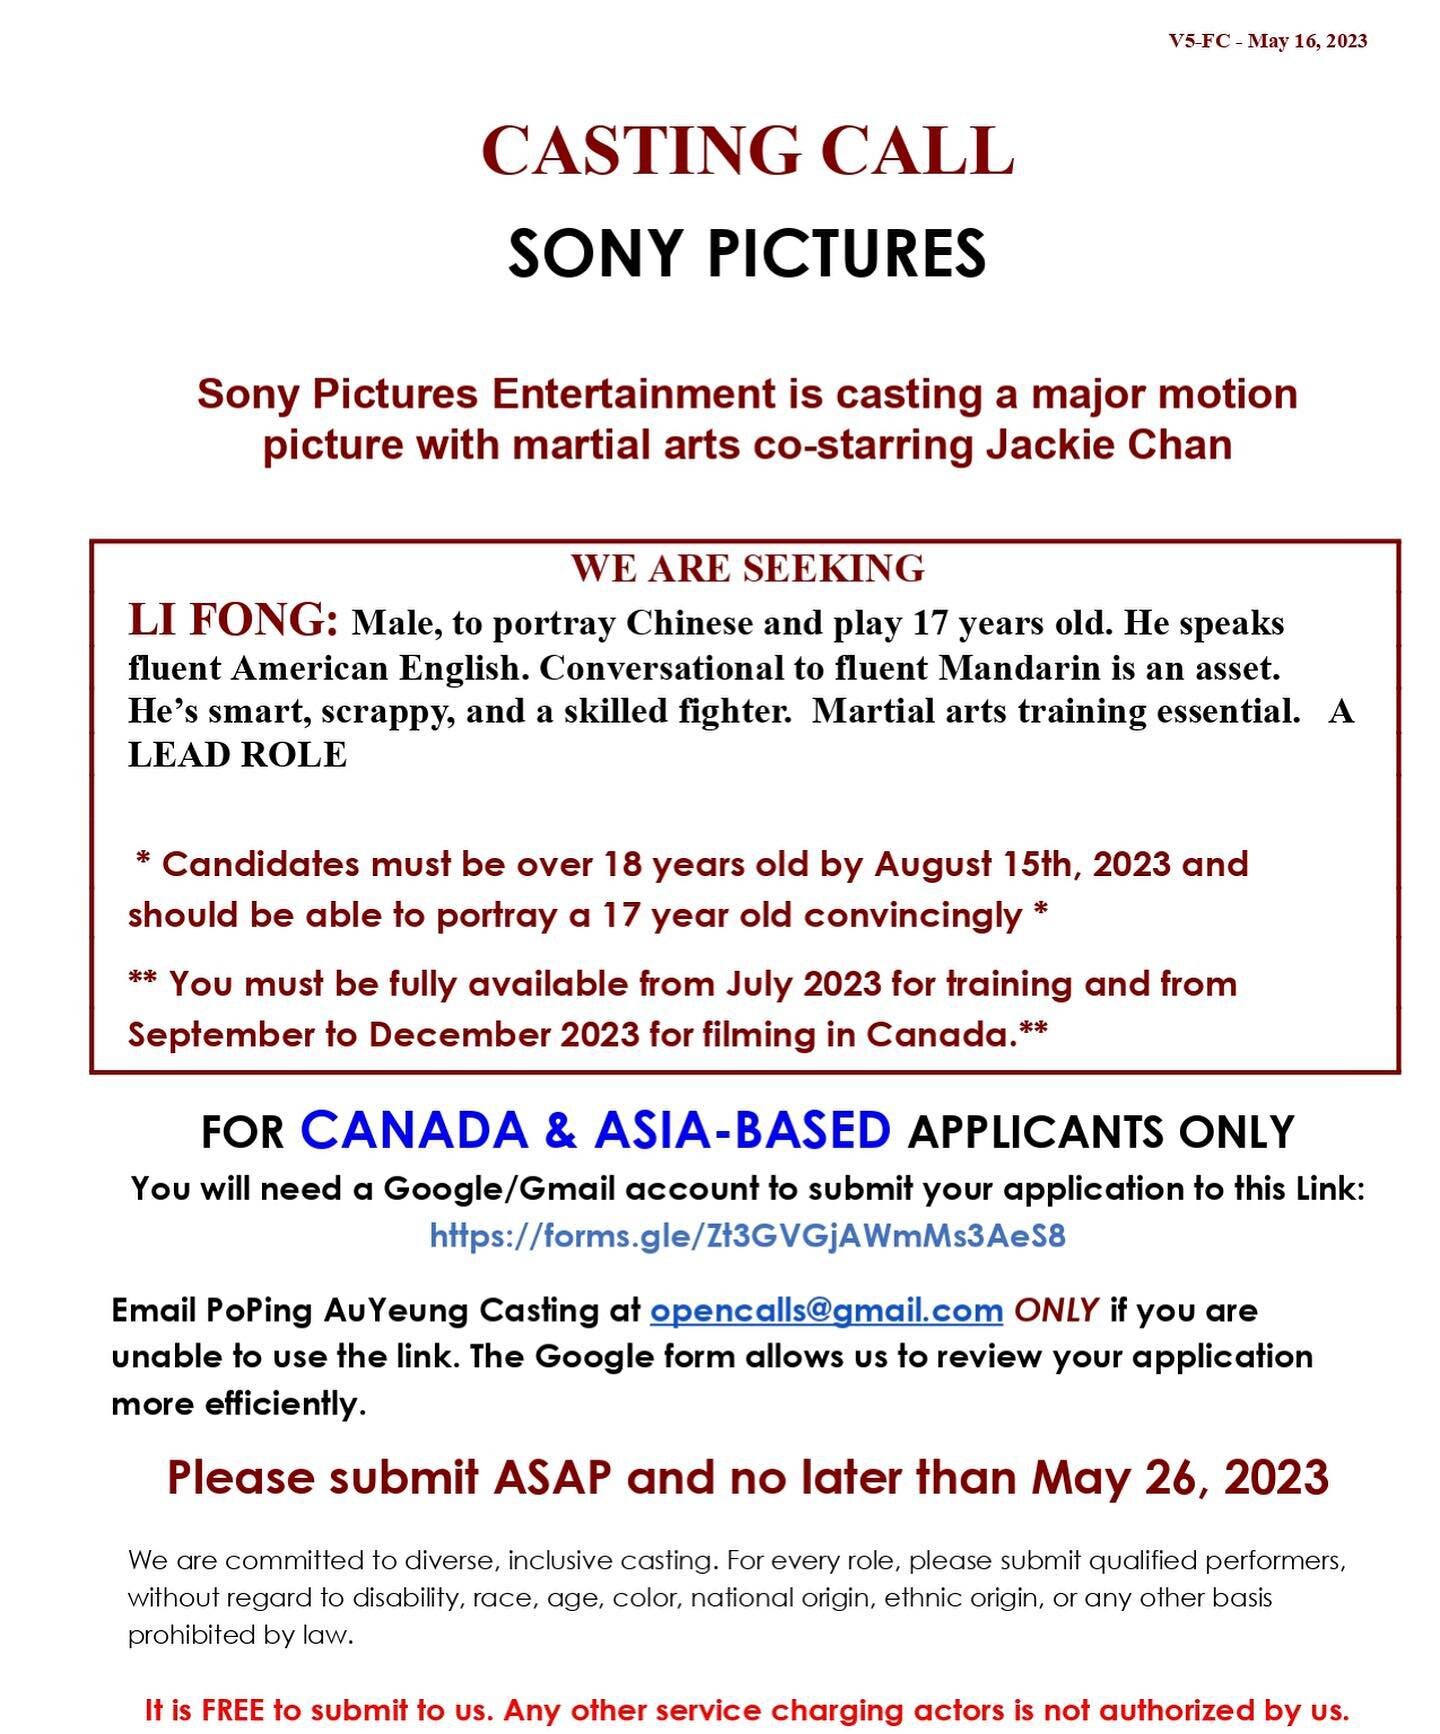 FOR APPLICANTS BASED IN CANADA AND ASIA ONLY.
Please direct inquiries to @popingcasting and not CAPE.

Sony Pictures Entertainment is casting a major motion picture with martial arts co-starring Jackie Chan.

Casting Director - Canada/Asia:  PoPing A